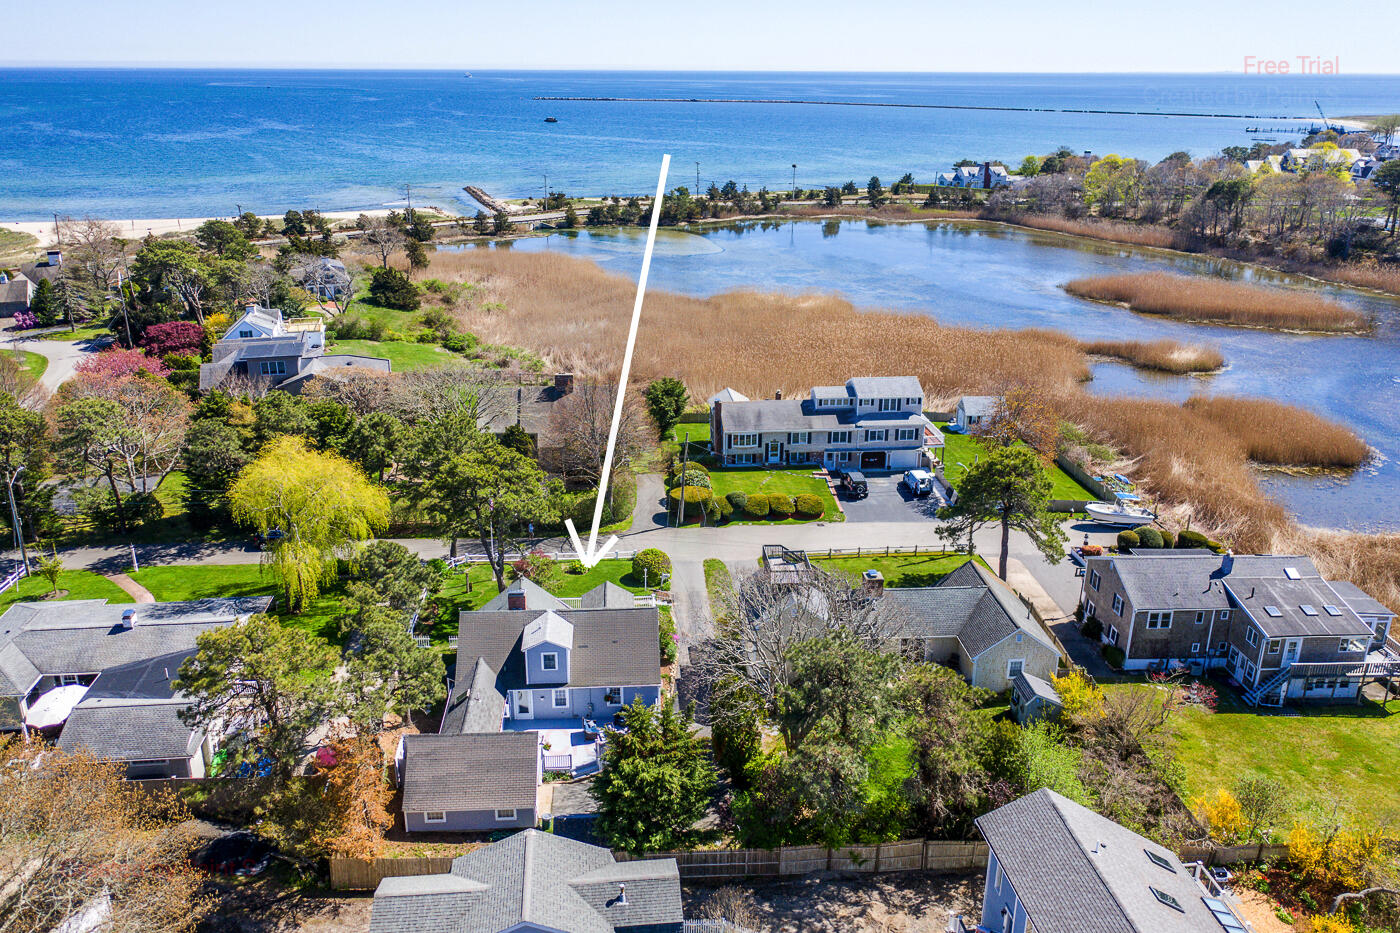 64 Studley Road, Hyannis, Massachusetts 02601, 3 Bedrooms Bedrooms, 7 Rooms Rooms,2 BathroomsBathrooms,Residential,For Sale,64 Studley Road,22402008